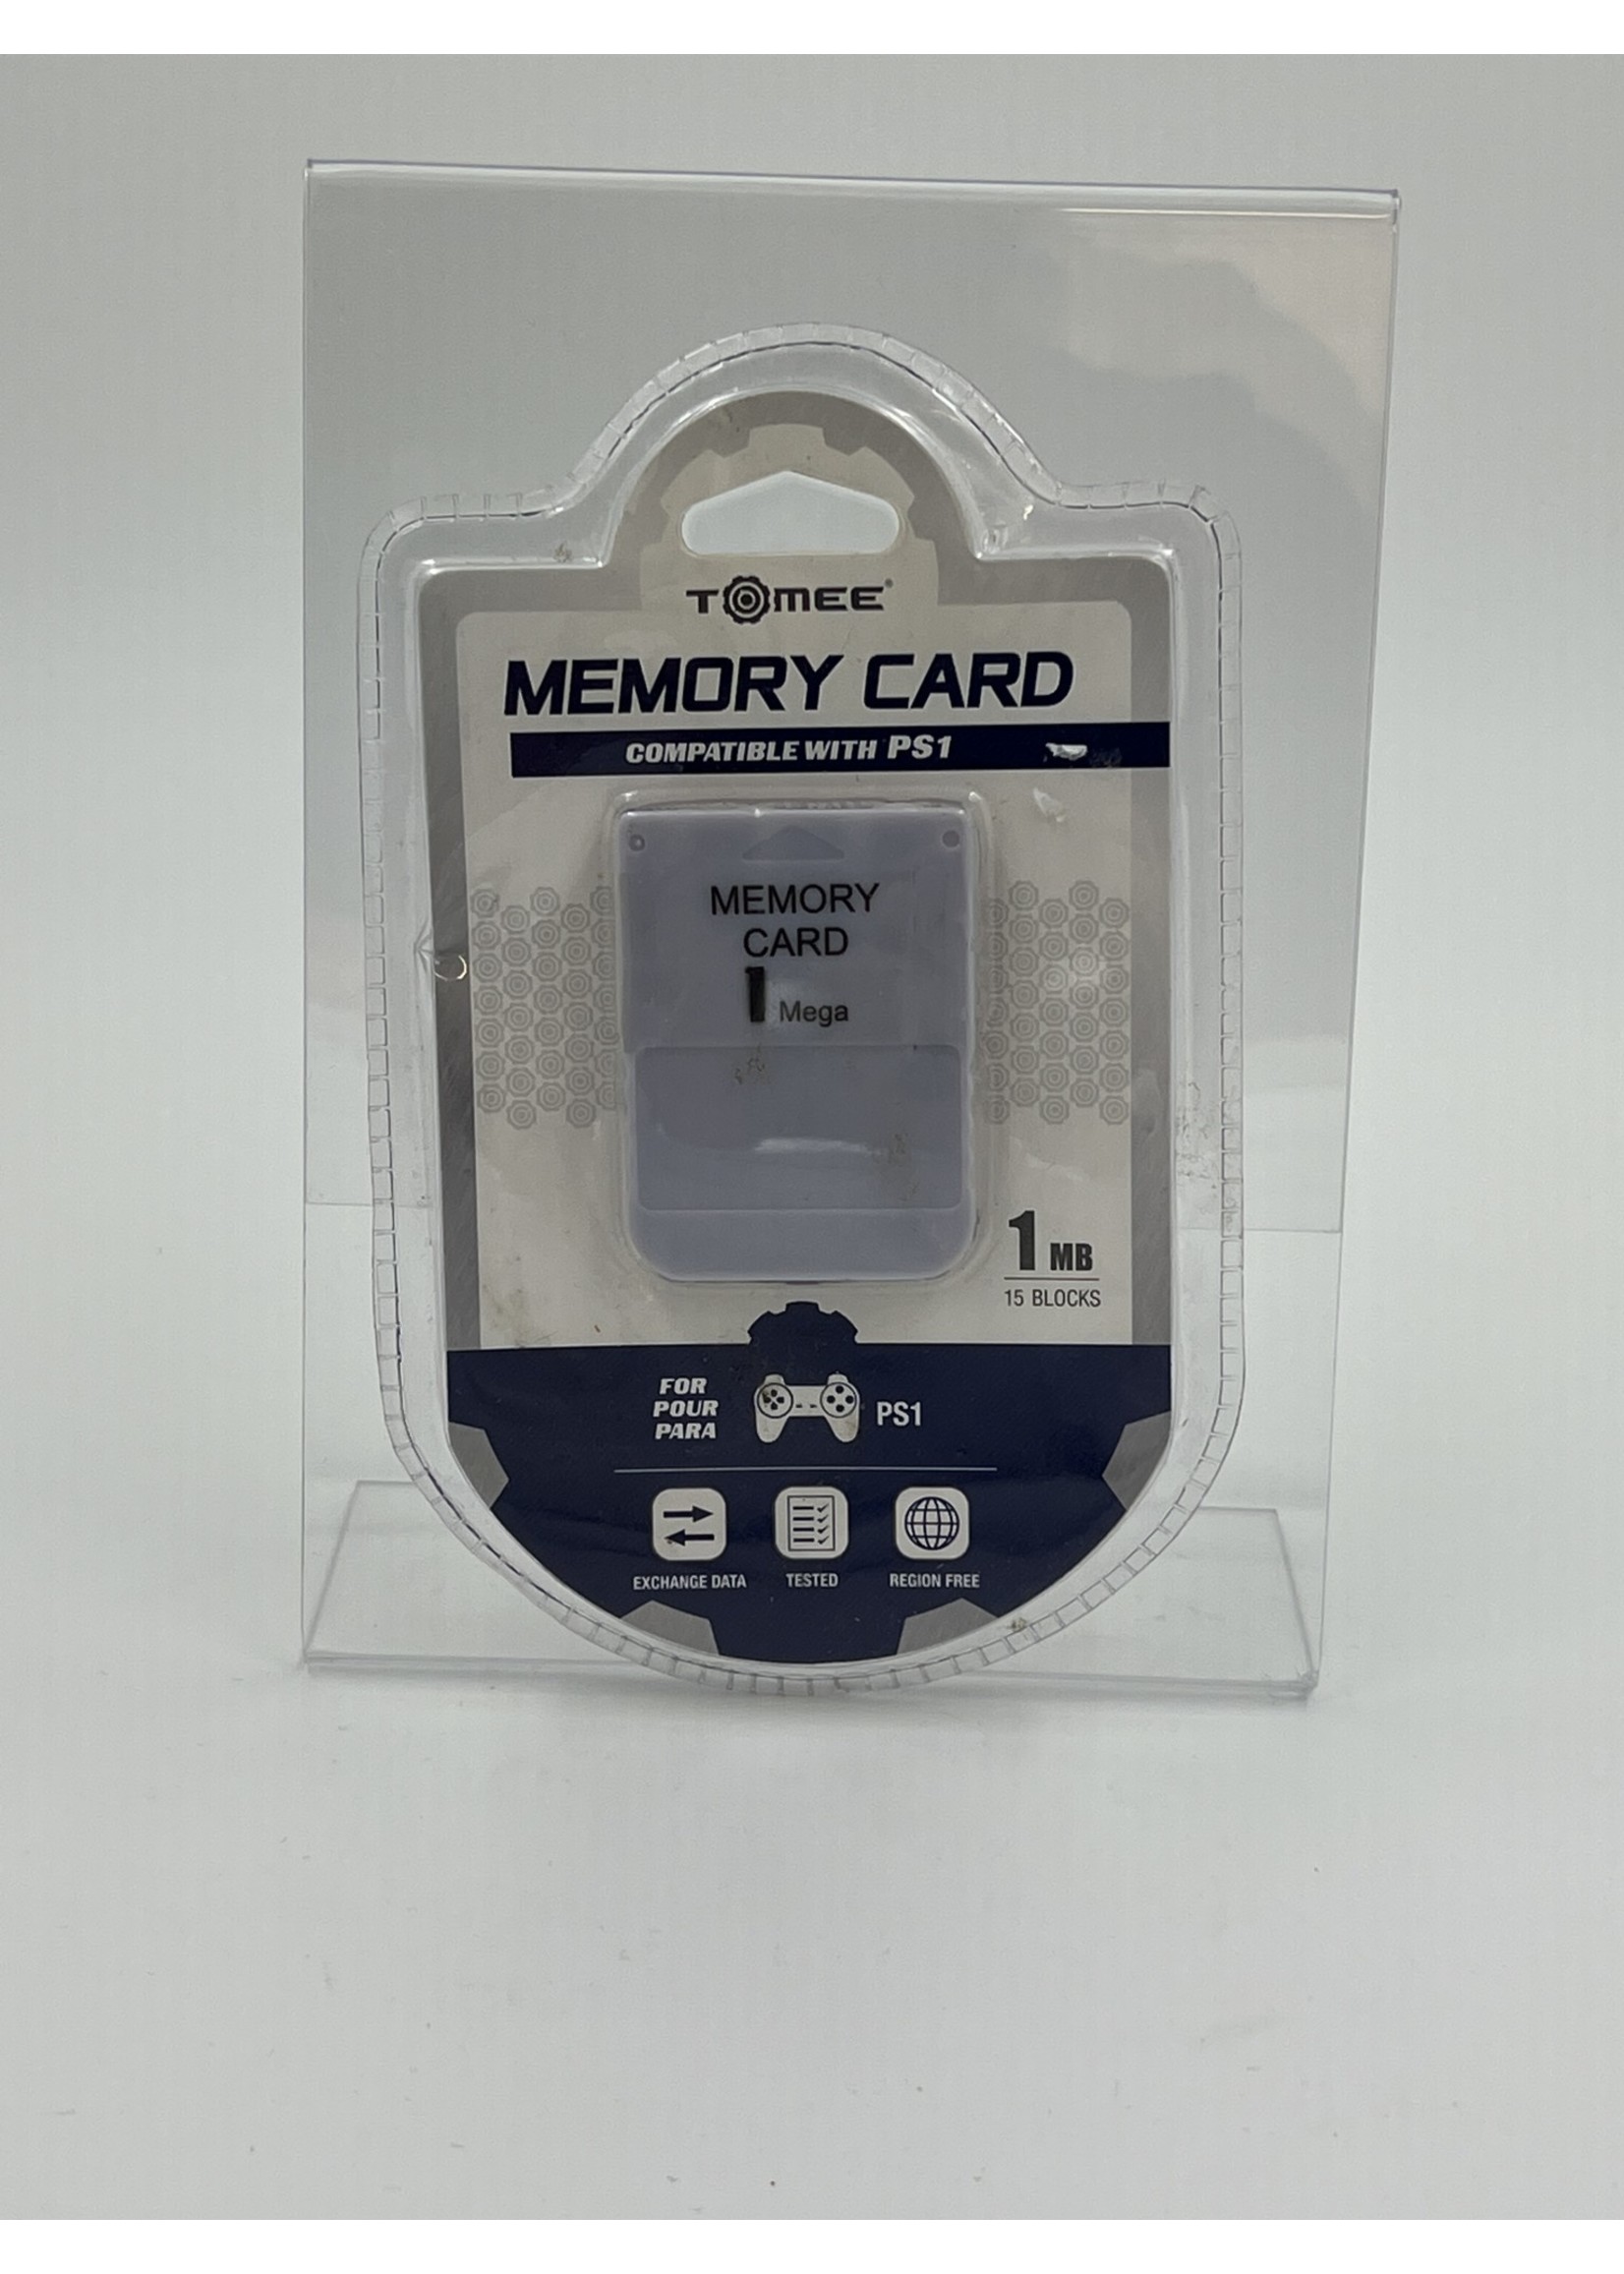 Sony Tomee Ps1 Memory Card 1Mb